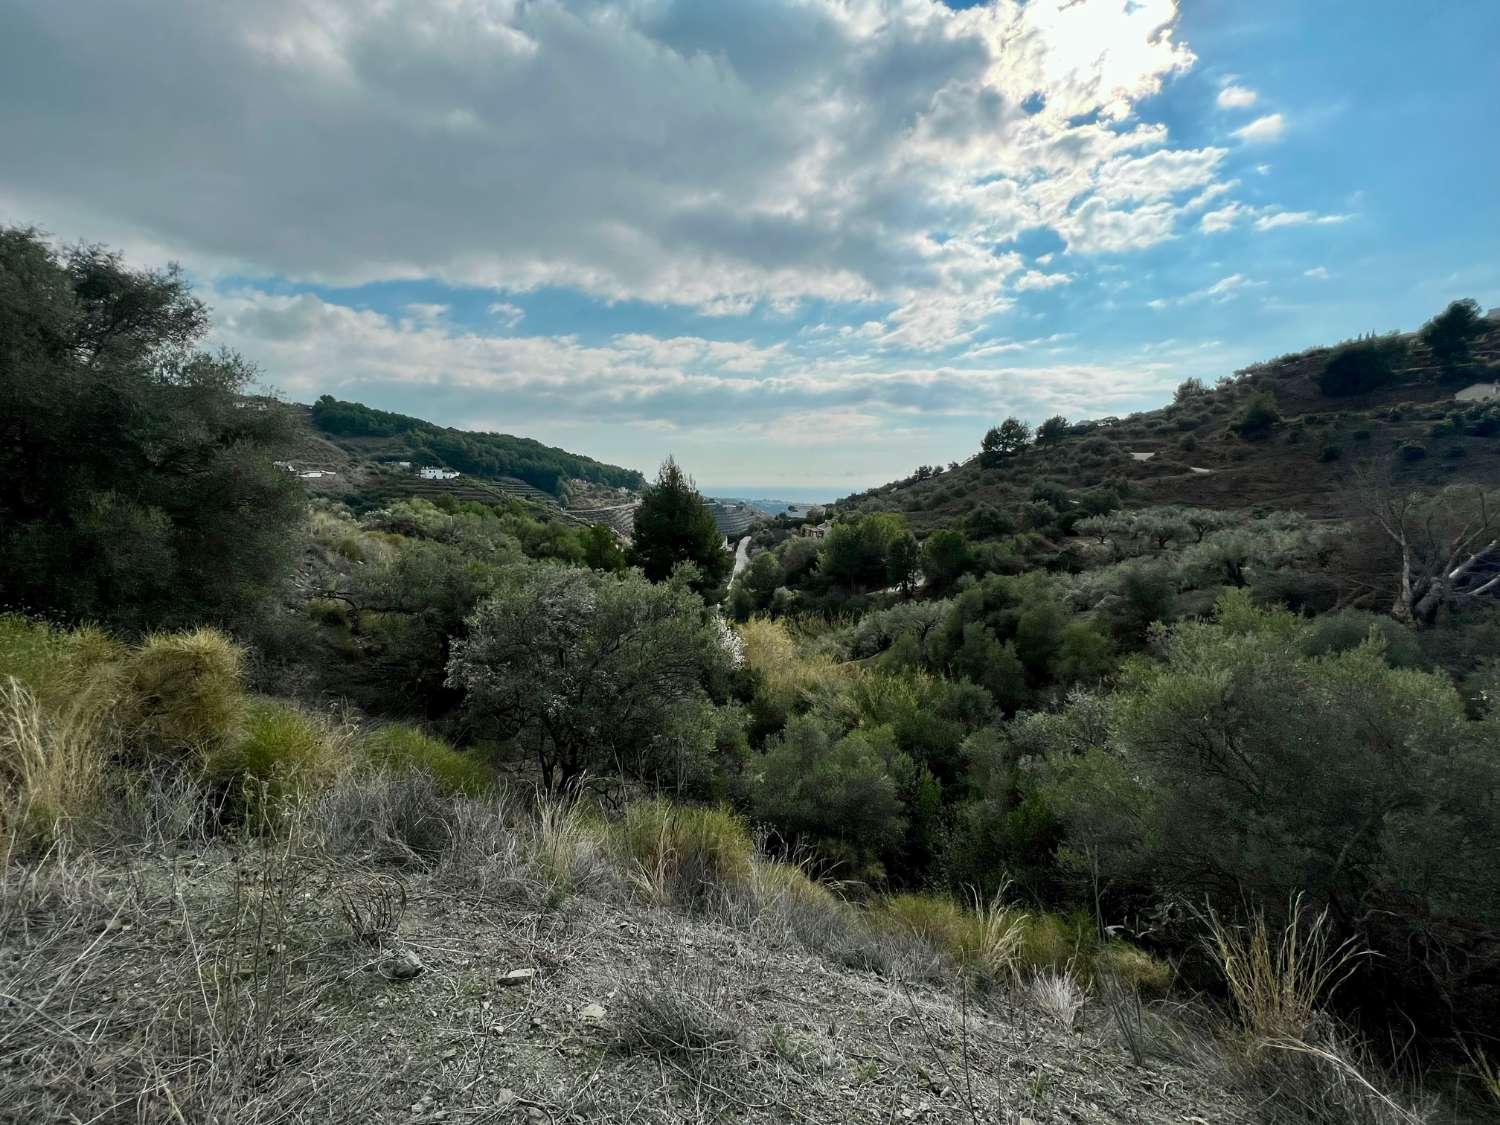 Beautiful plot with an old country house in Frigiliana.